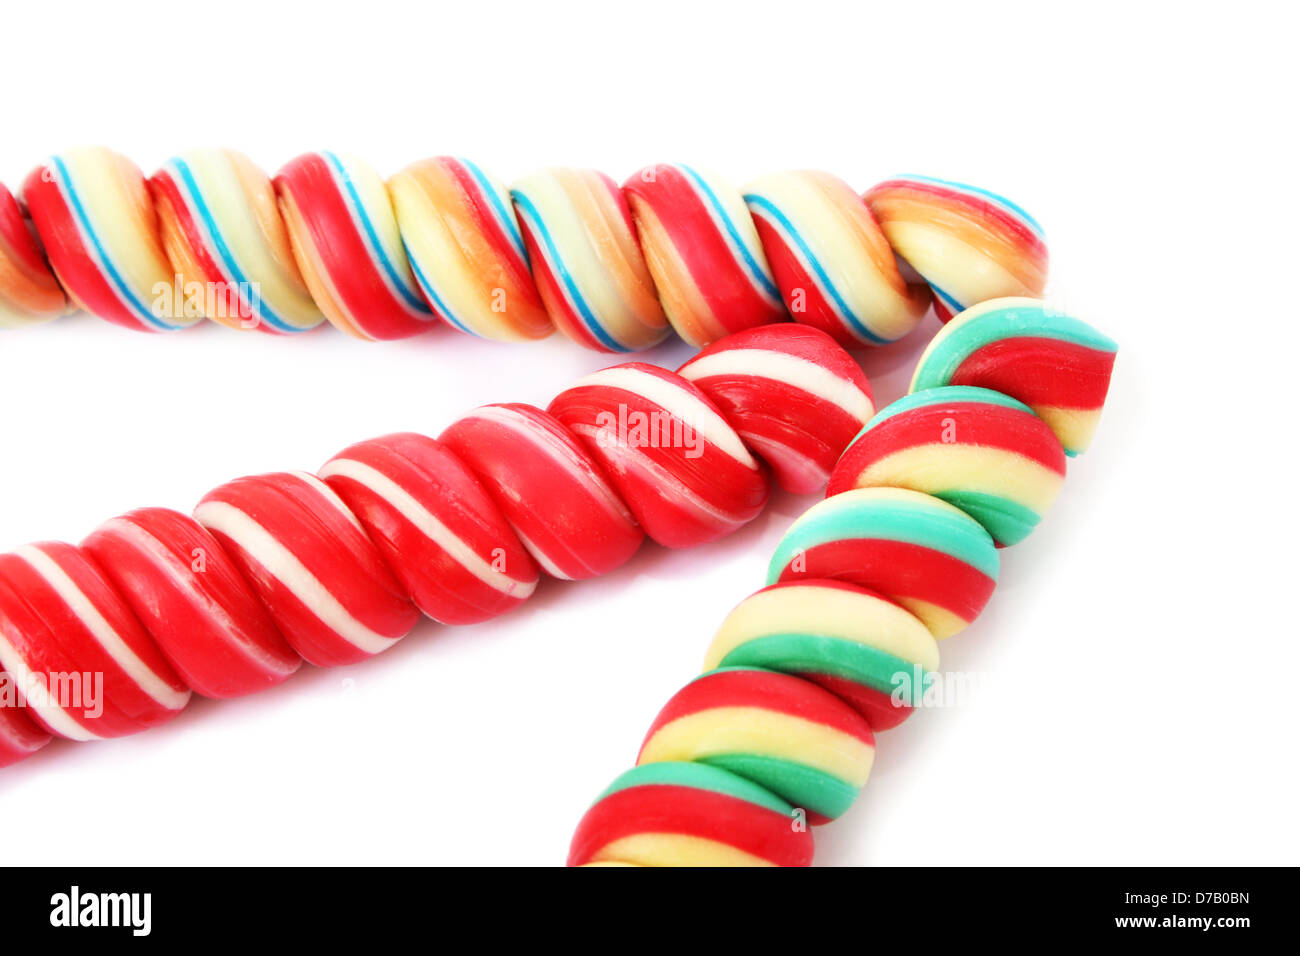 Colorful lollipops isolated on white background. Stock Photo